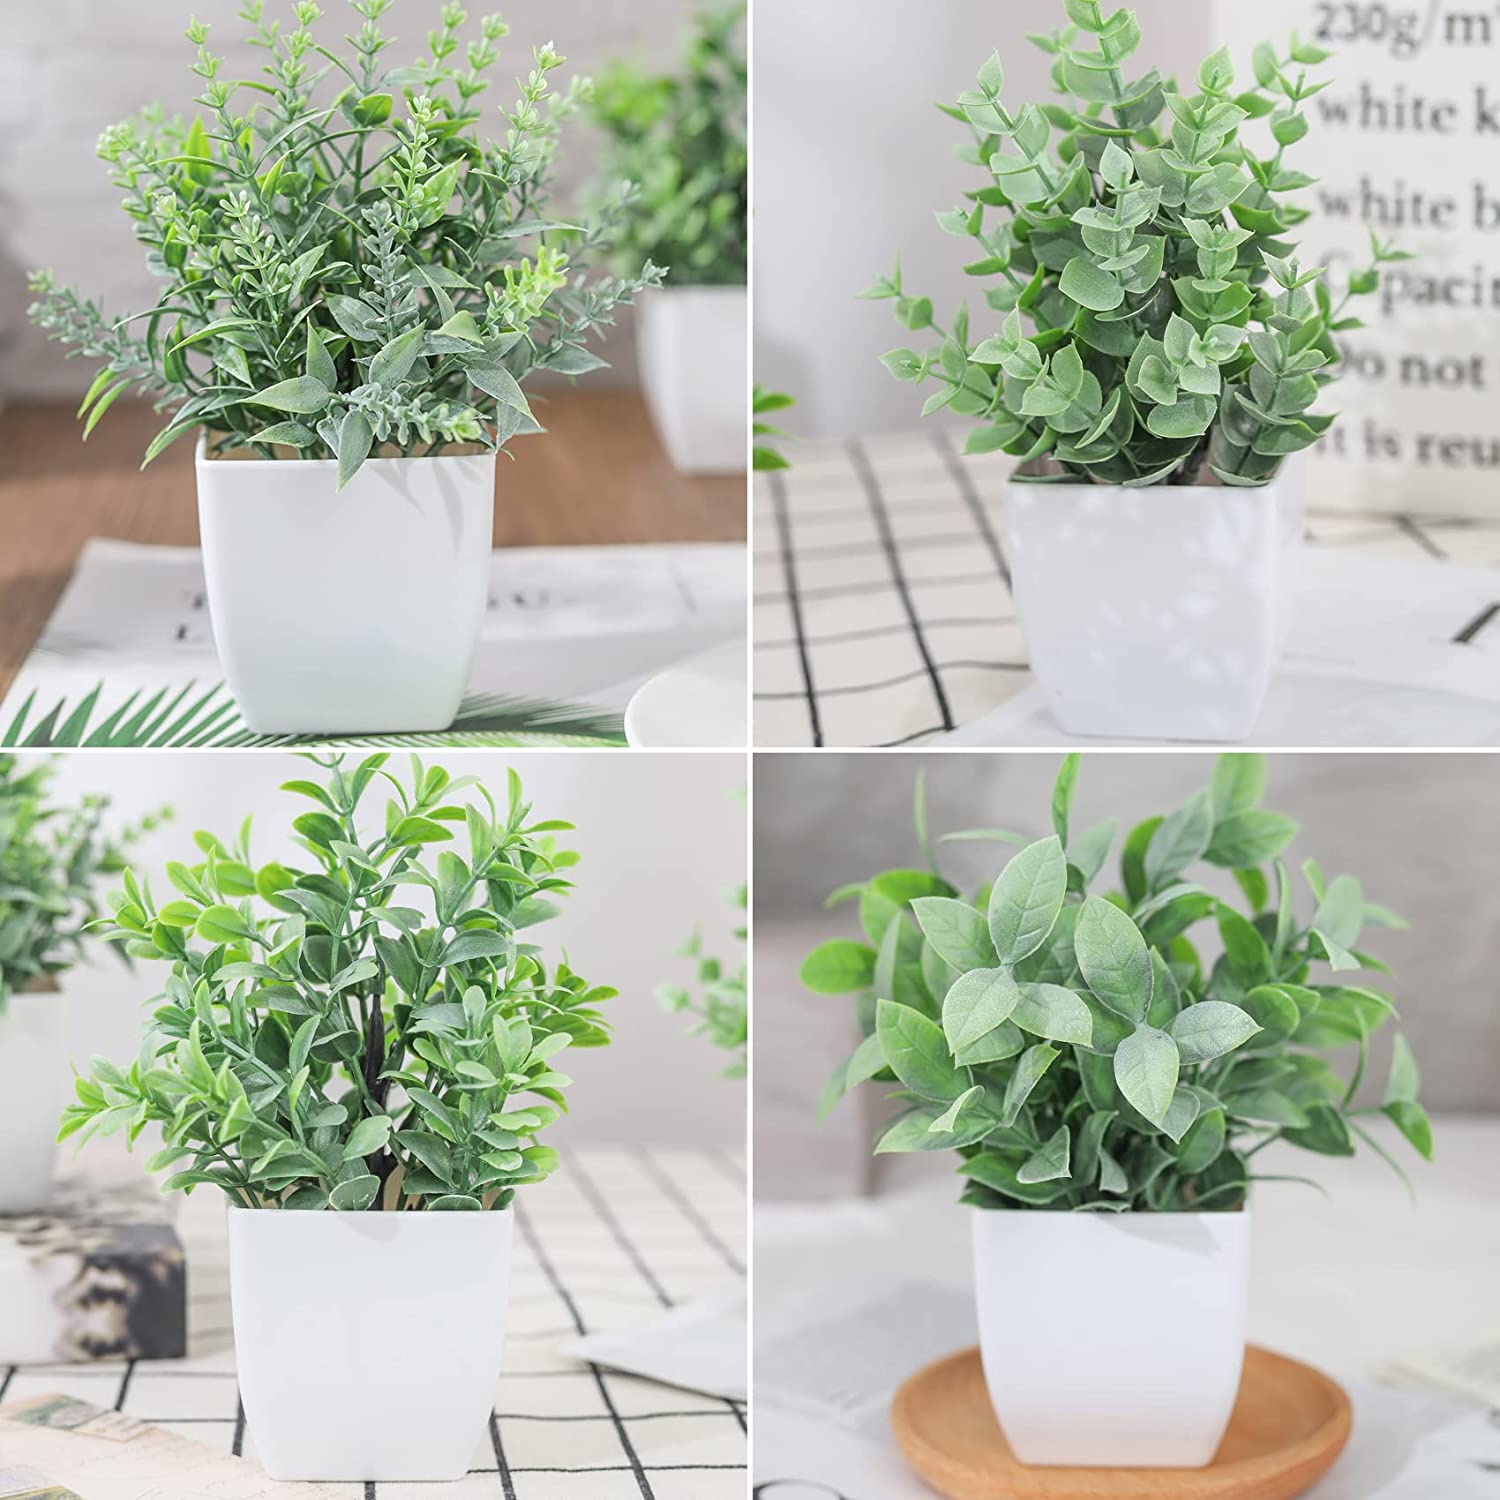 Der Rose 4 Packs Fake Plants Mini Artificial Greenery Potted Plants for  Home Decor Indoor Office Table Room Farmhouse